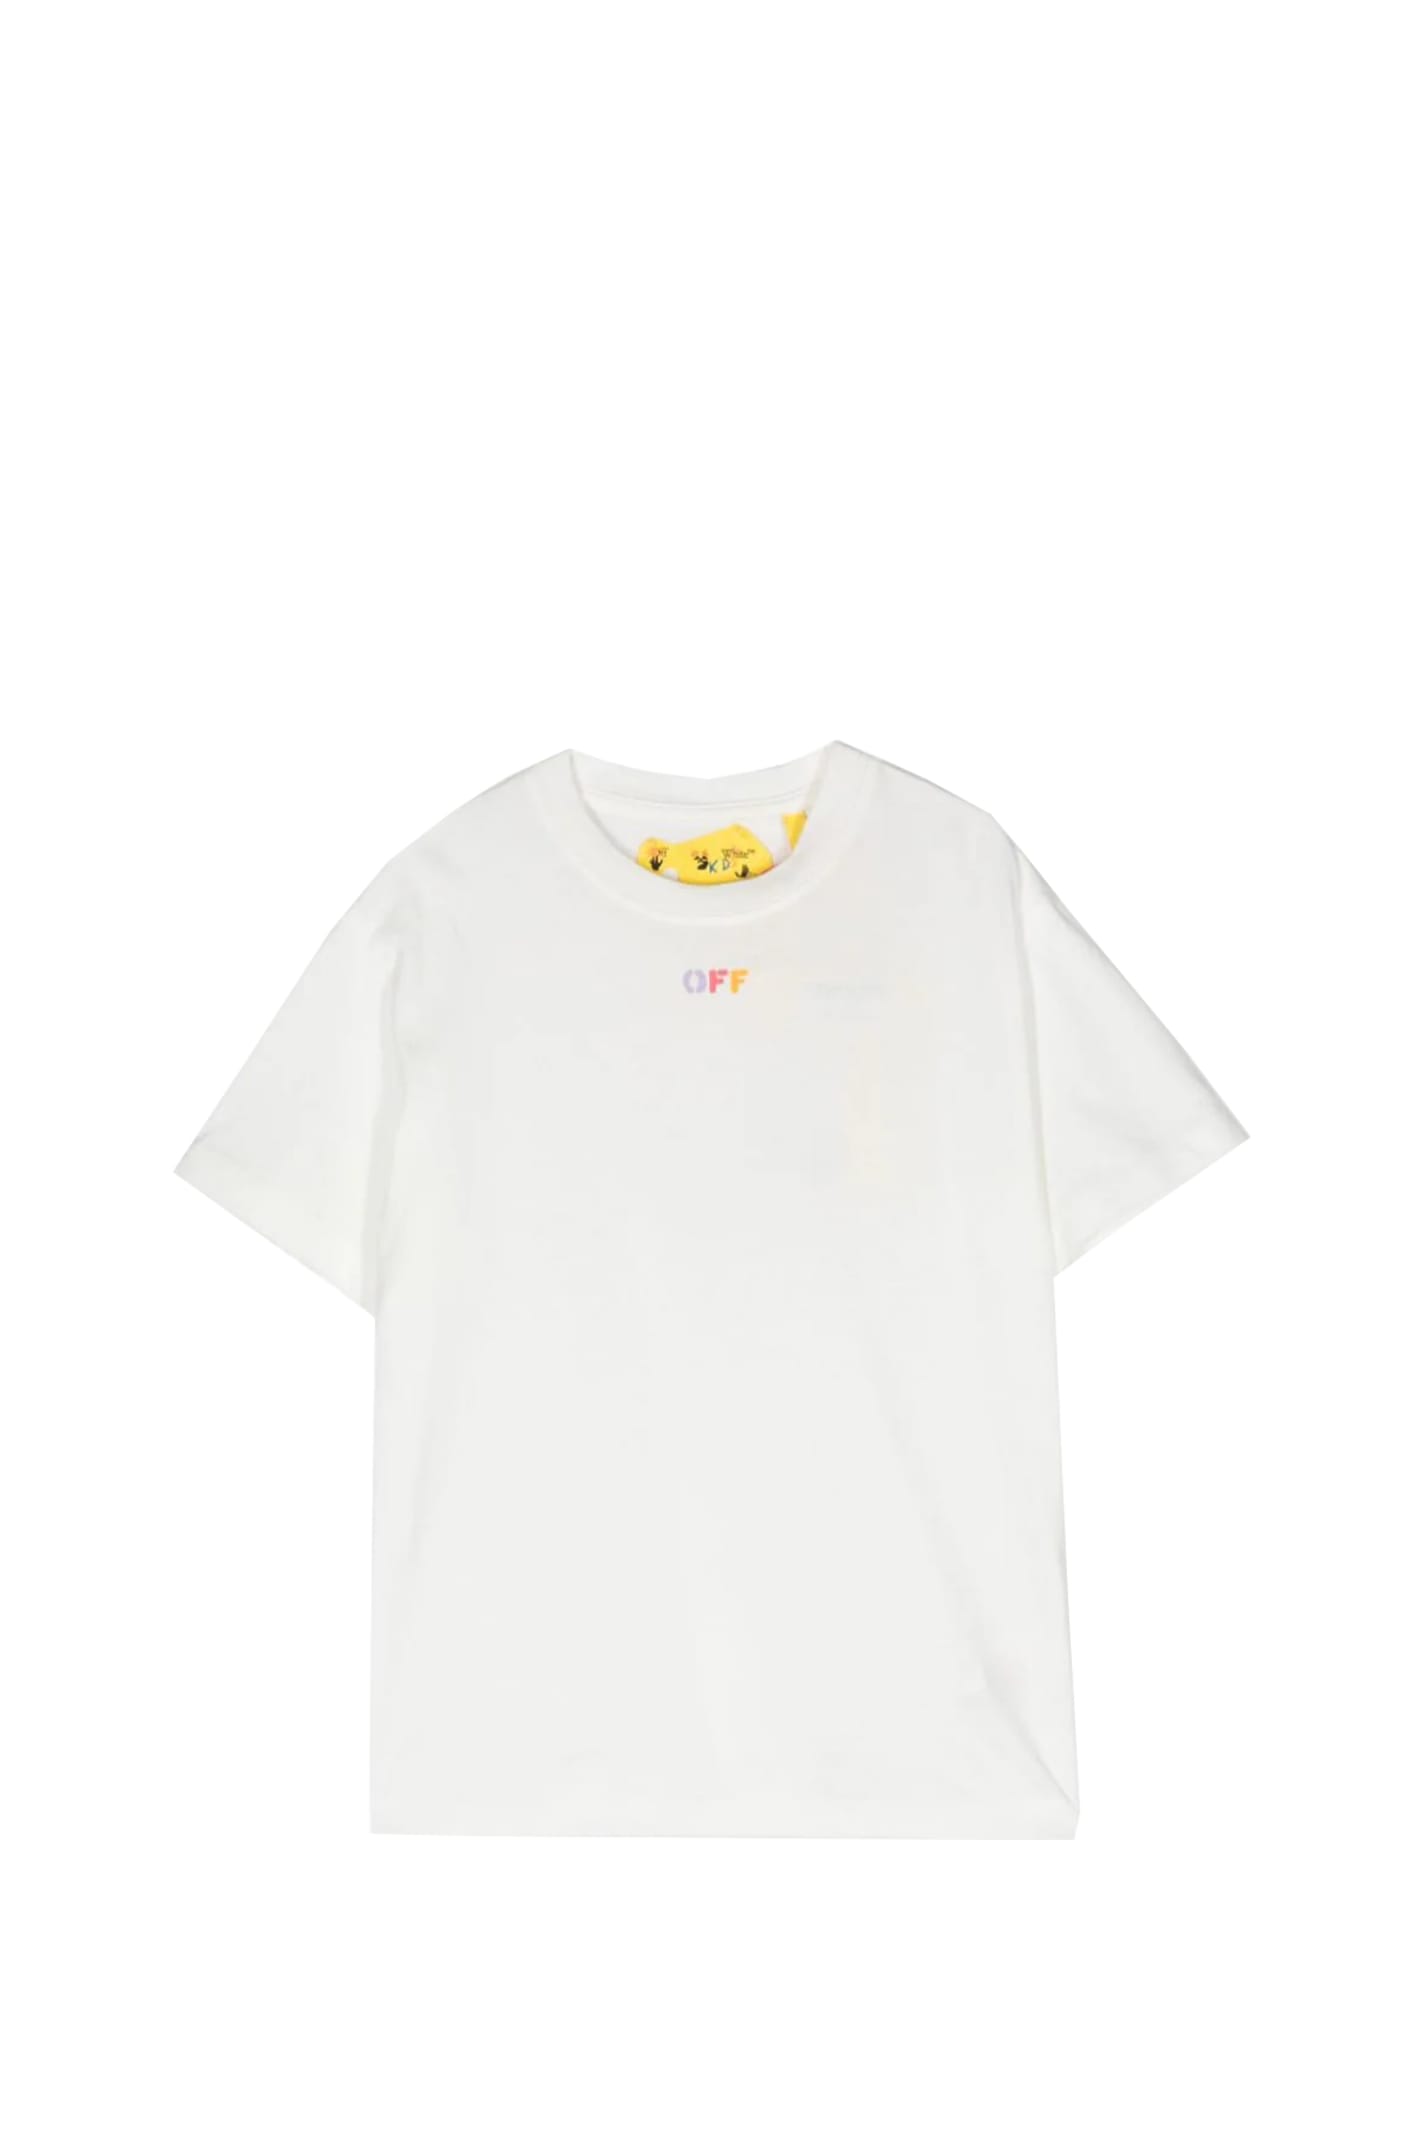 OFF-WHITE T-SHIRT WITH PRINT